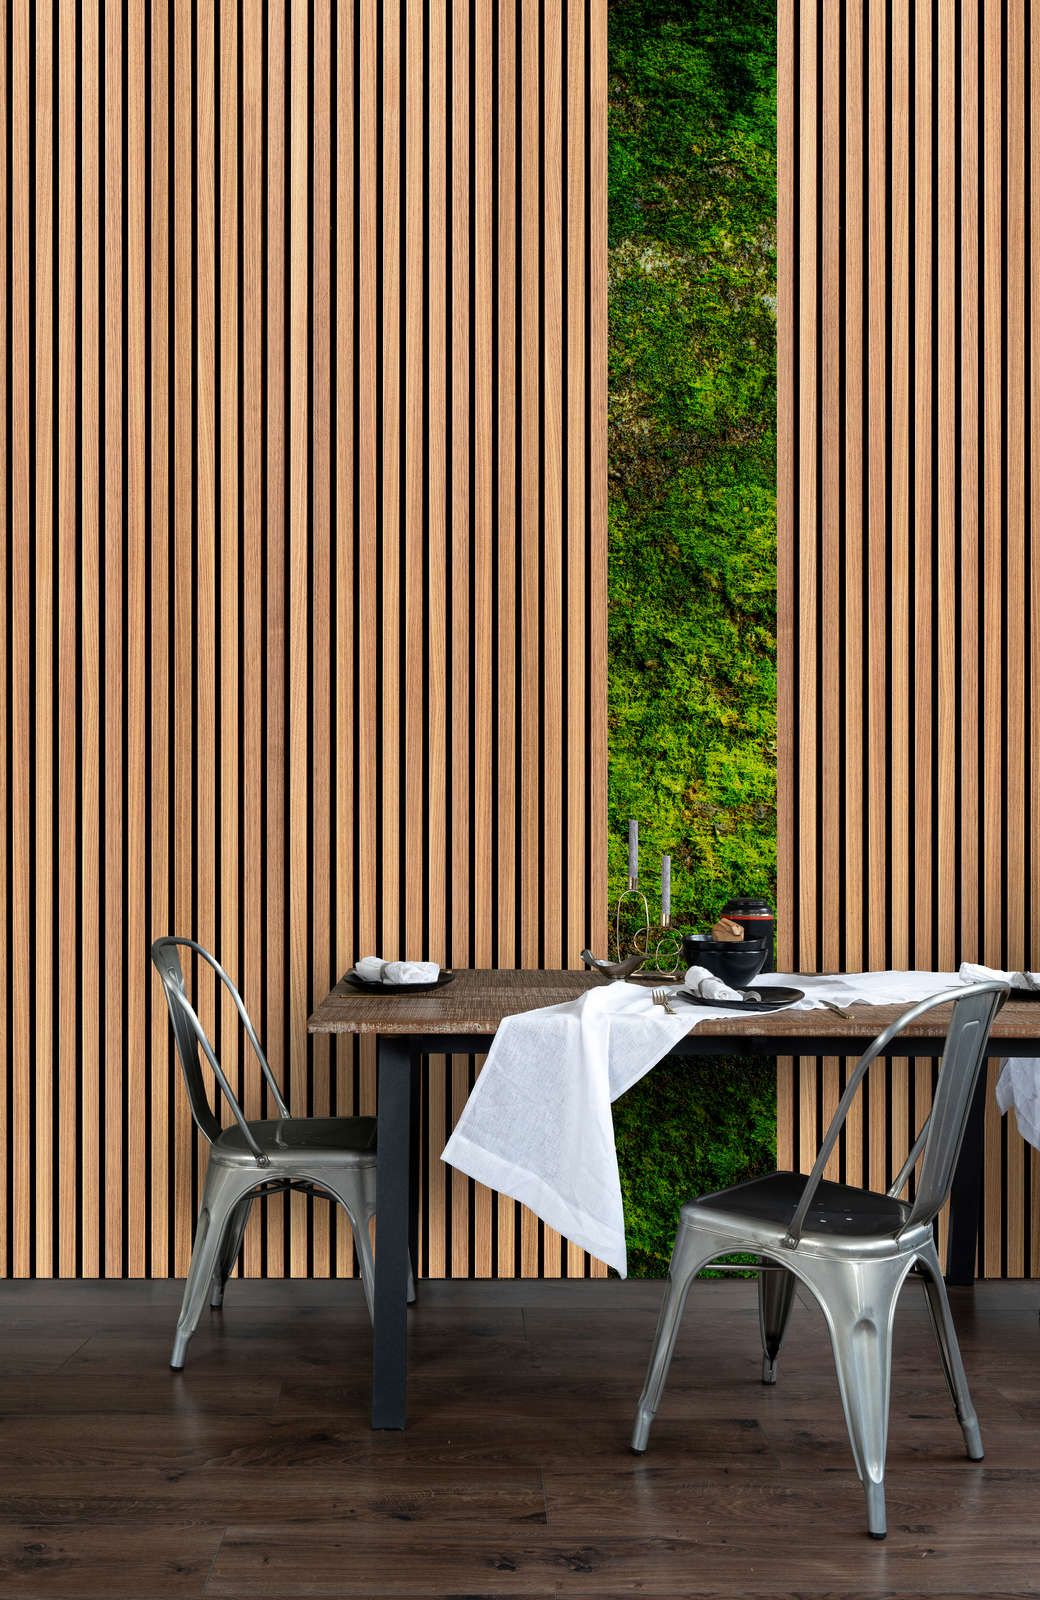             Photo wallpaper »panel 2« - Wide wood panels & moss - Smooth, slightly shiny premium non-woven fabric
        